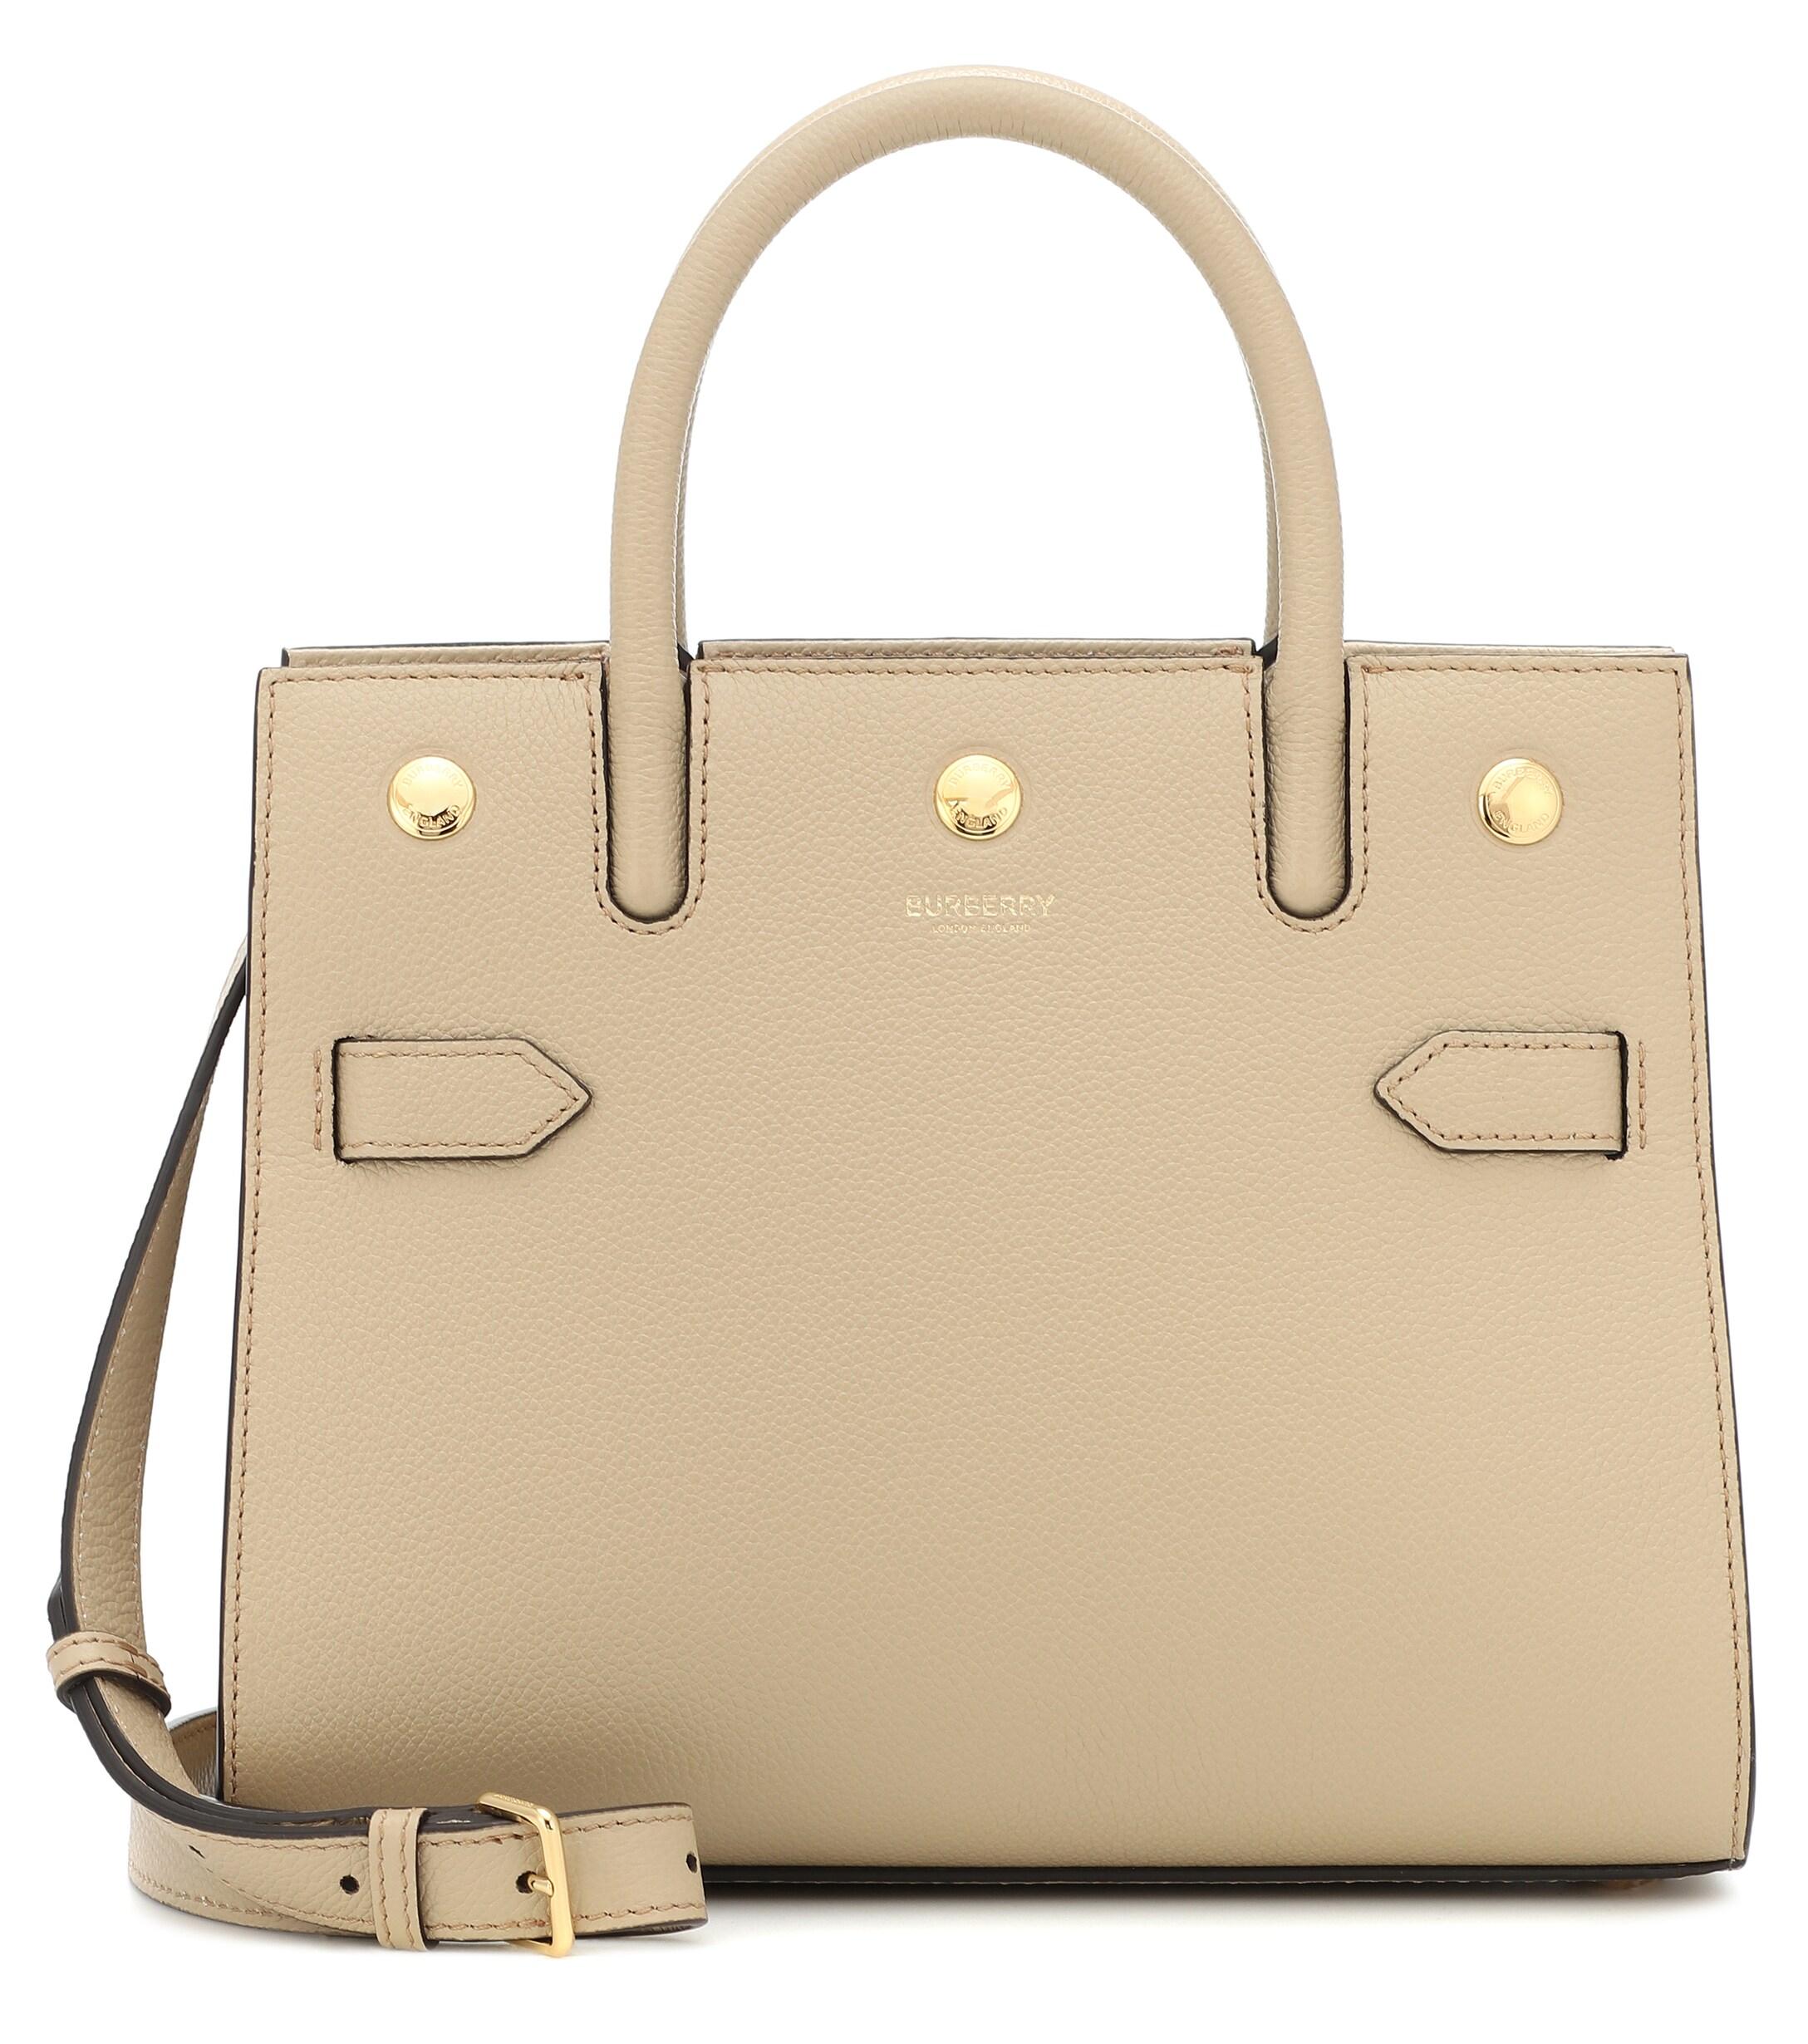 Burberry Medium Title Leather Satchel in Natural | Lyst